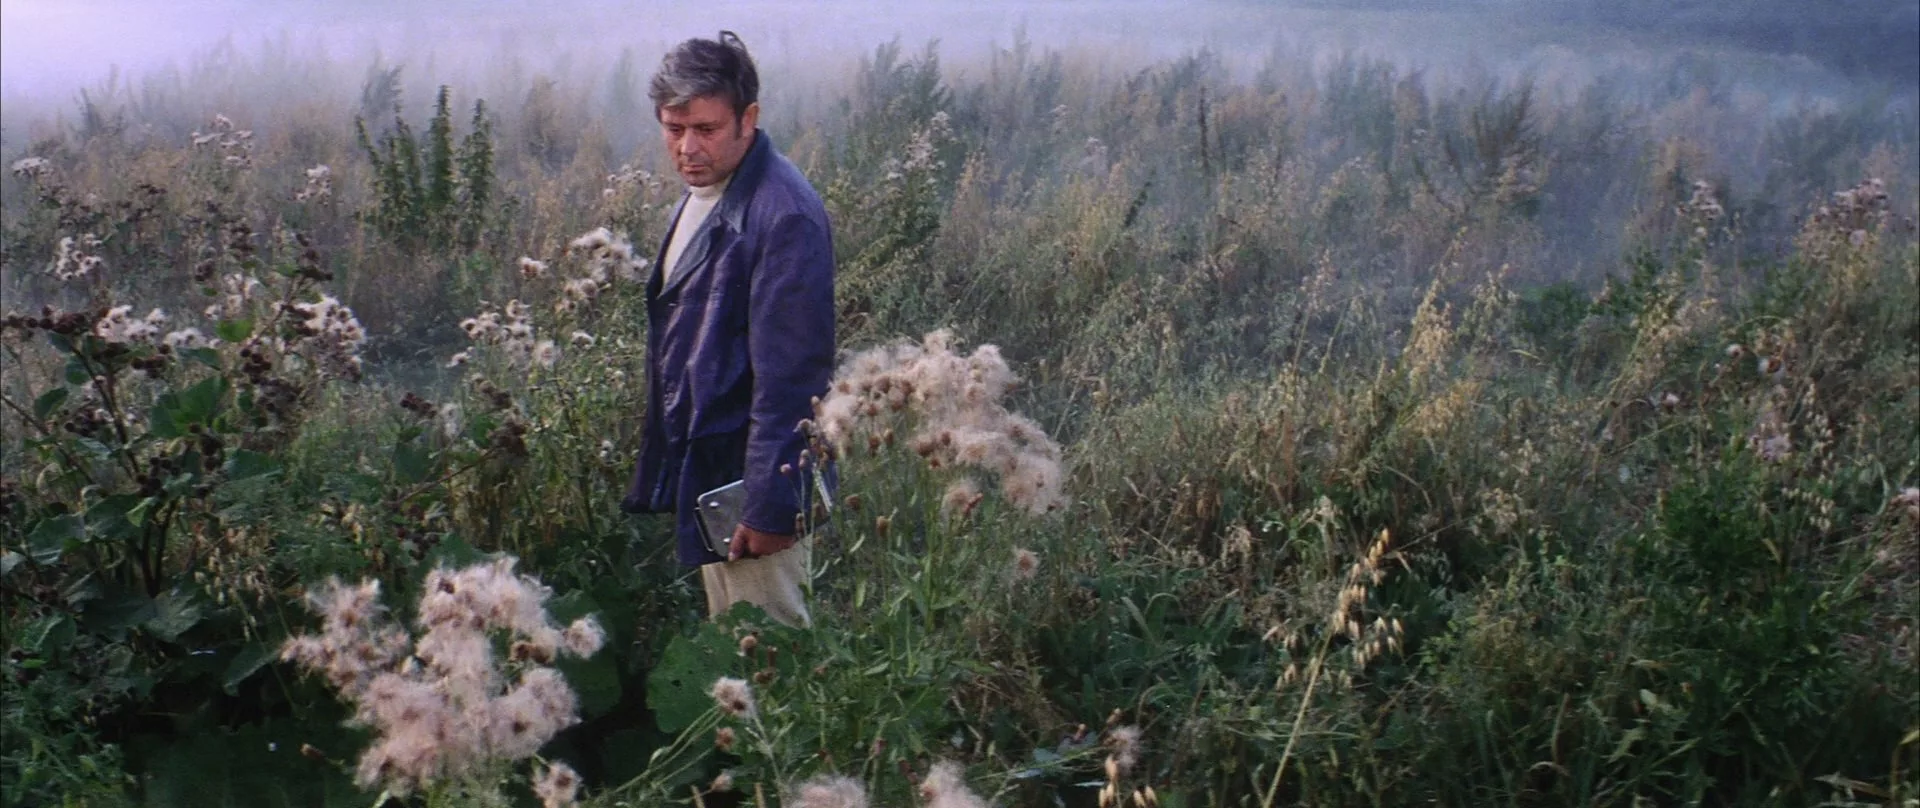 a man stands in the middle of a field if flowers and weeds